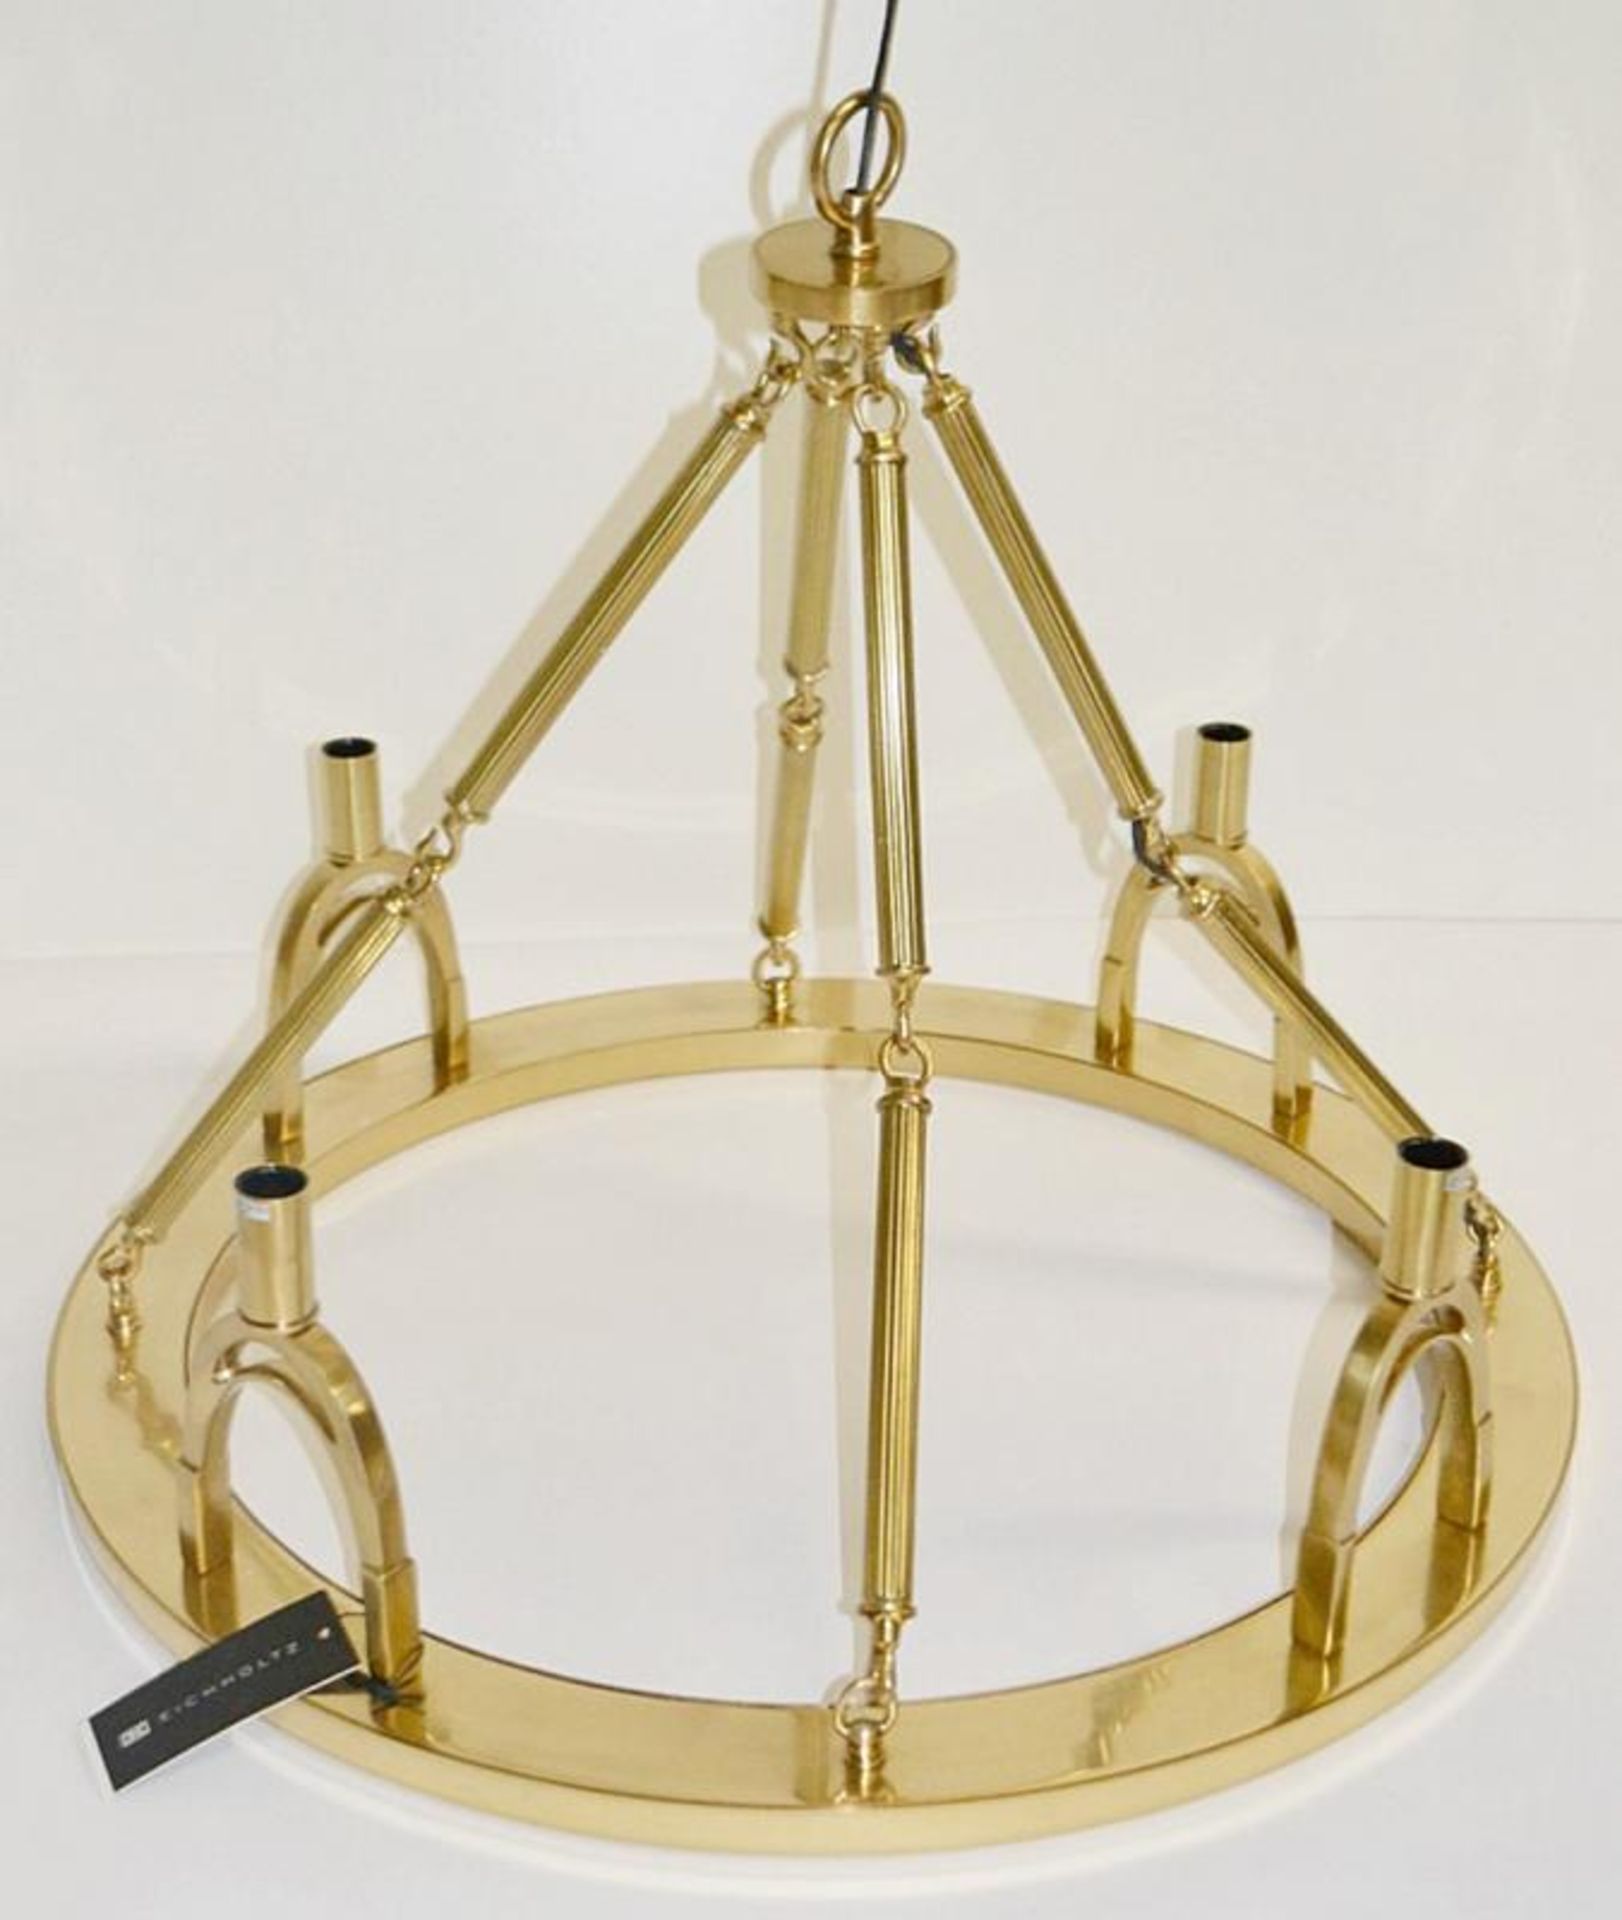 1 x Eichholtz 'Jigger' Equestrian-inspired Chandelier With An Aged Brass Finish - Includes 2 x Sets - Image 10 of 15